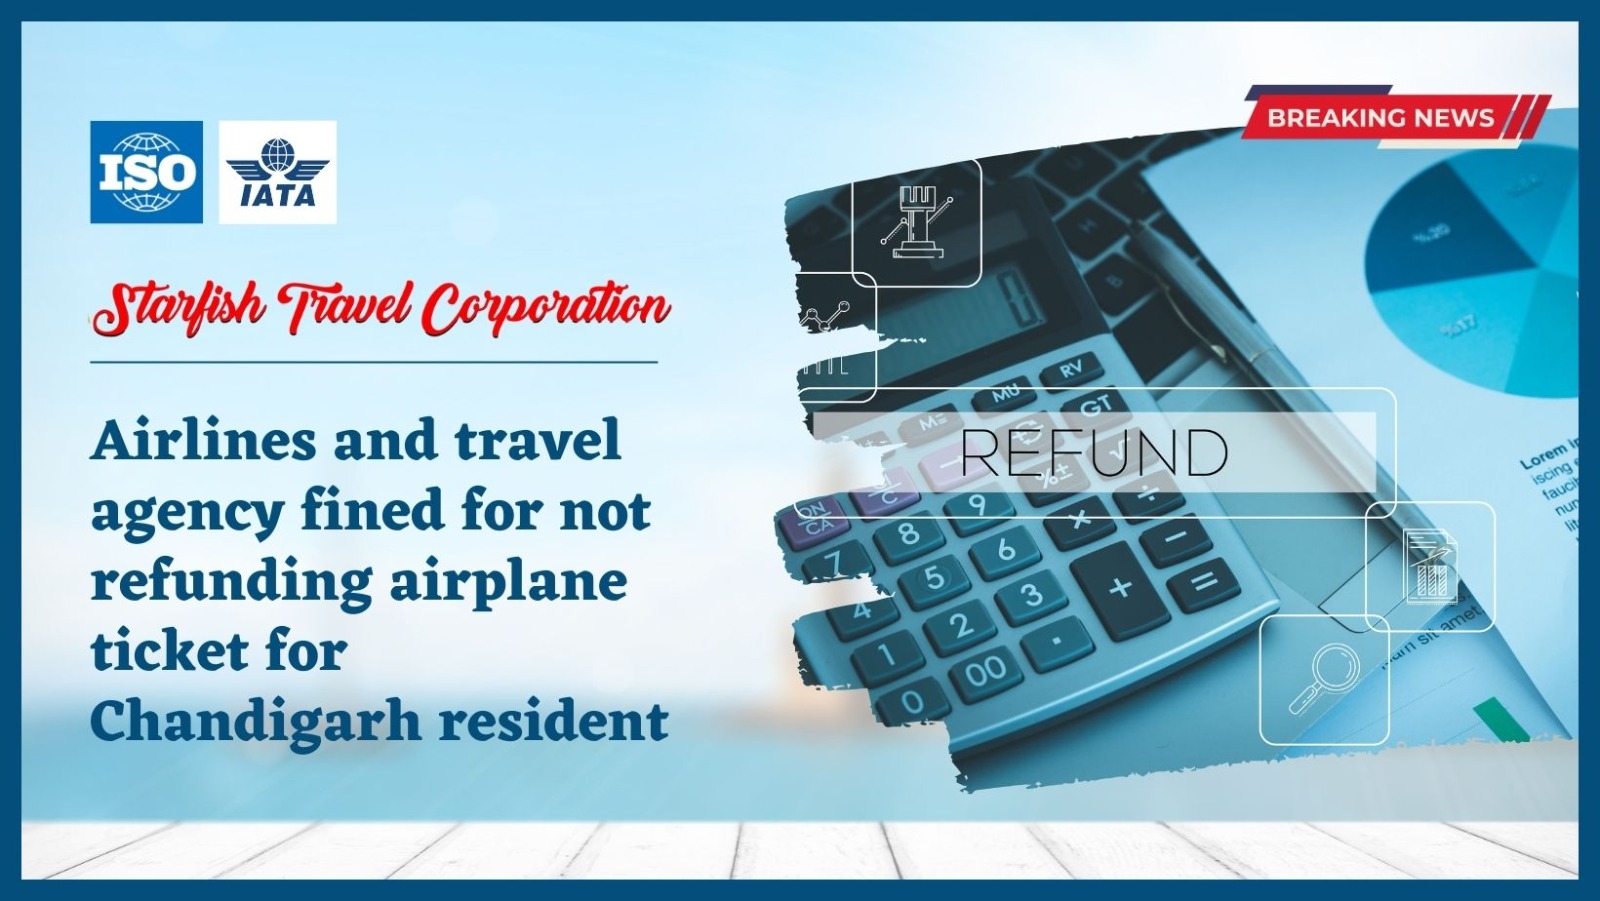 Airlines and travel agency fined for not refunding airplane ticket for Chandigarh resident